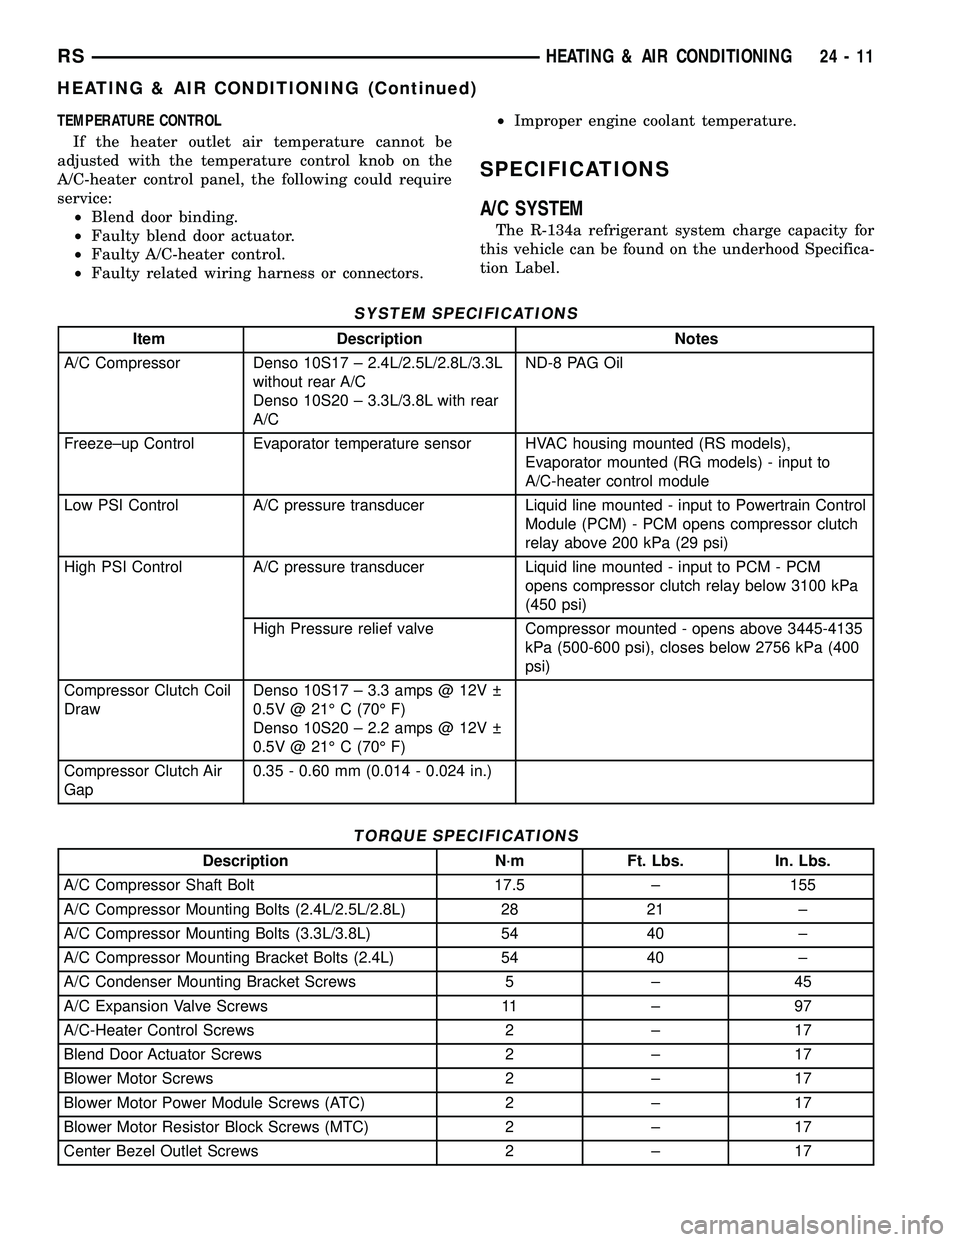 CHRYSLER VOYAGER 2005  Service Manual TEMPERATURE CONTROL
If the heater outlet air temperature cannot be
adjusted with the temperature control knob on the
A/C-heater control panel, the following could require
service:
²Blend door binding